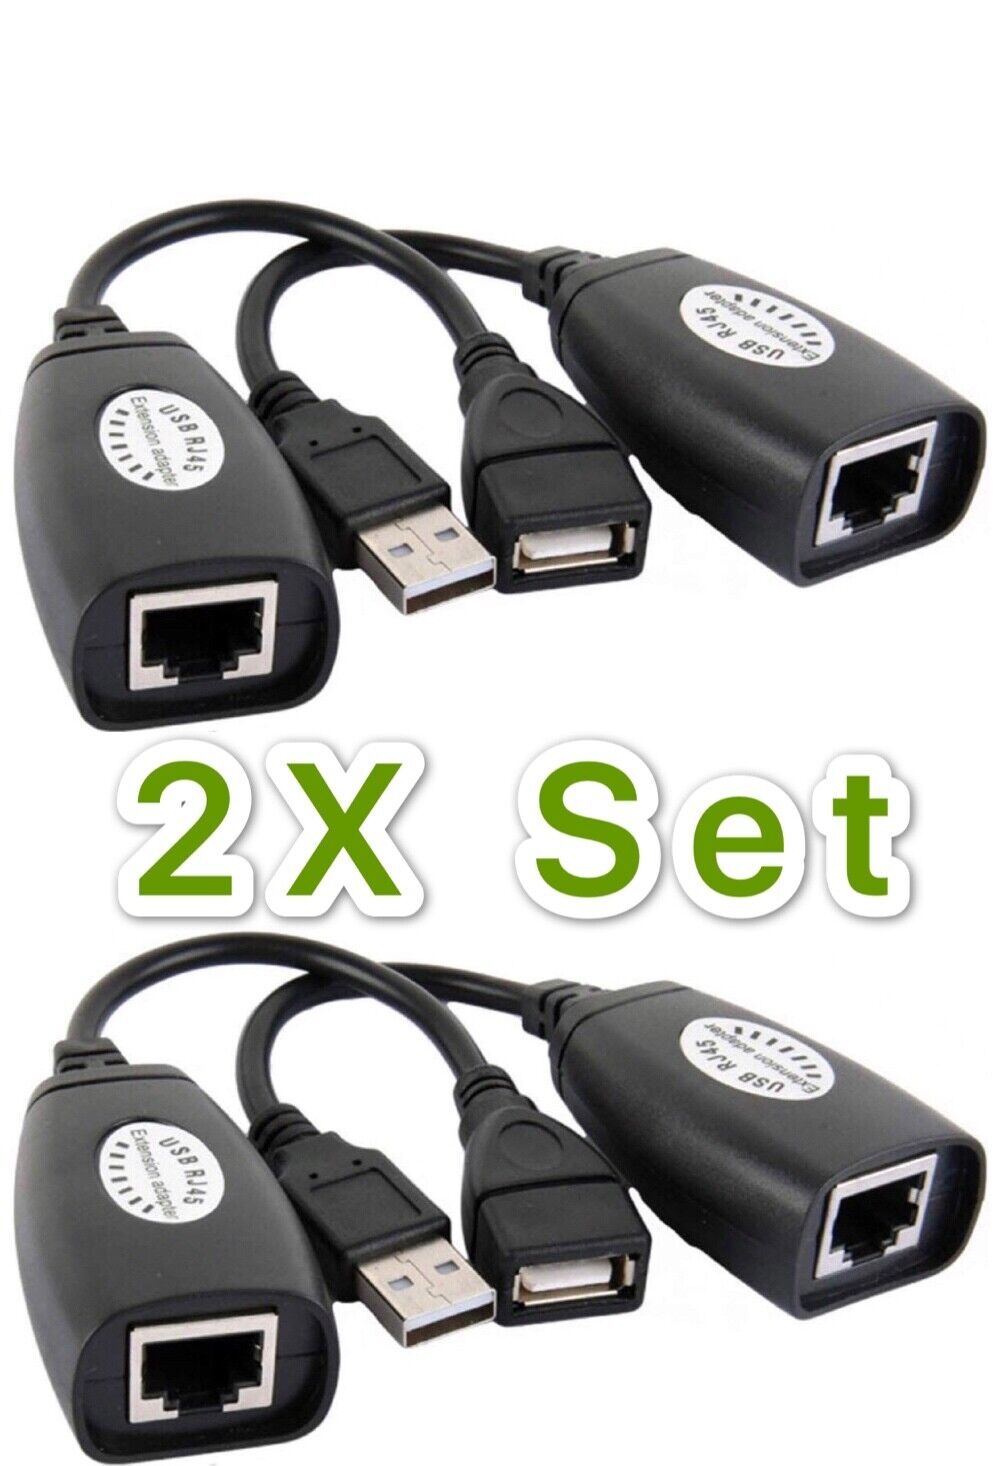 2X Set USB Extension Ethernet RJ45 Cat5e/6 Cable Adapter Extender Over Repeater